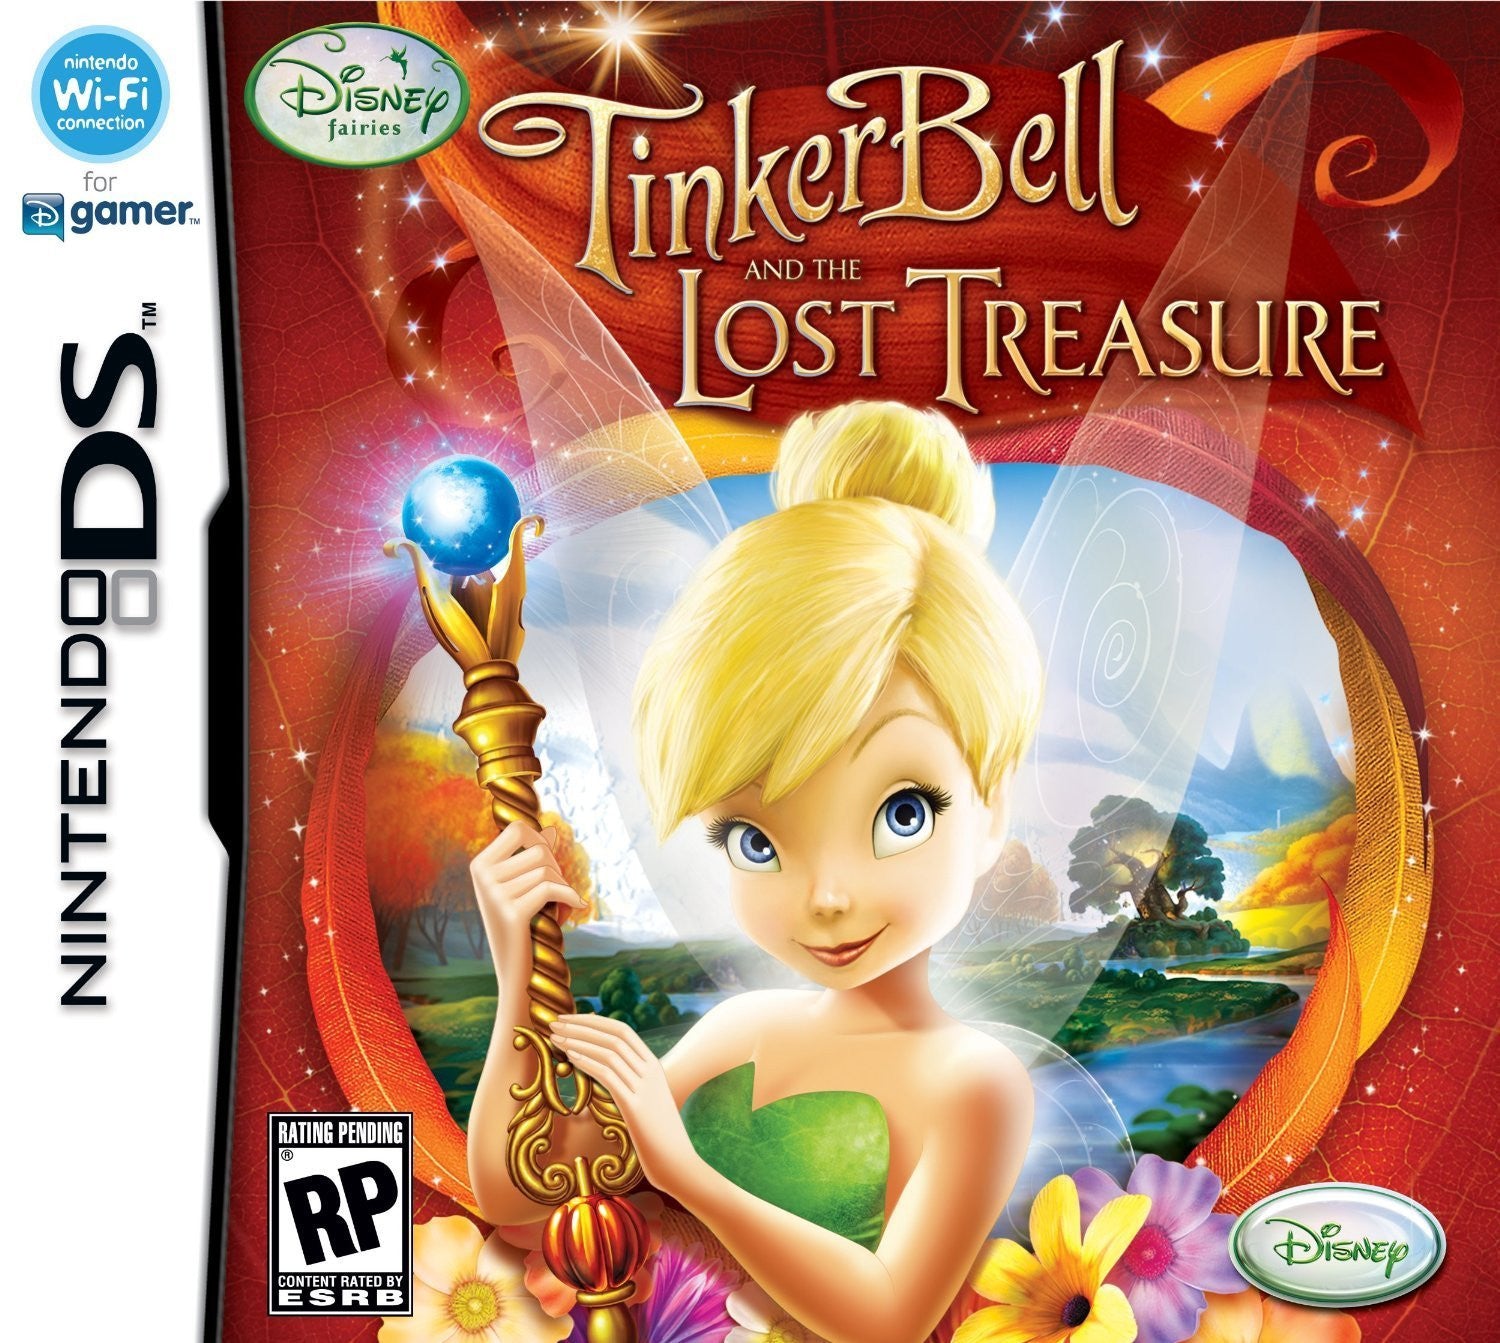 Disney Fairies: Tinkerbell and the Lost Treasure